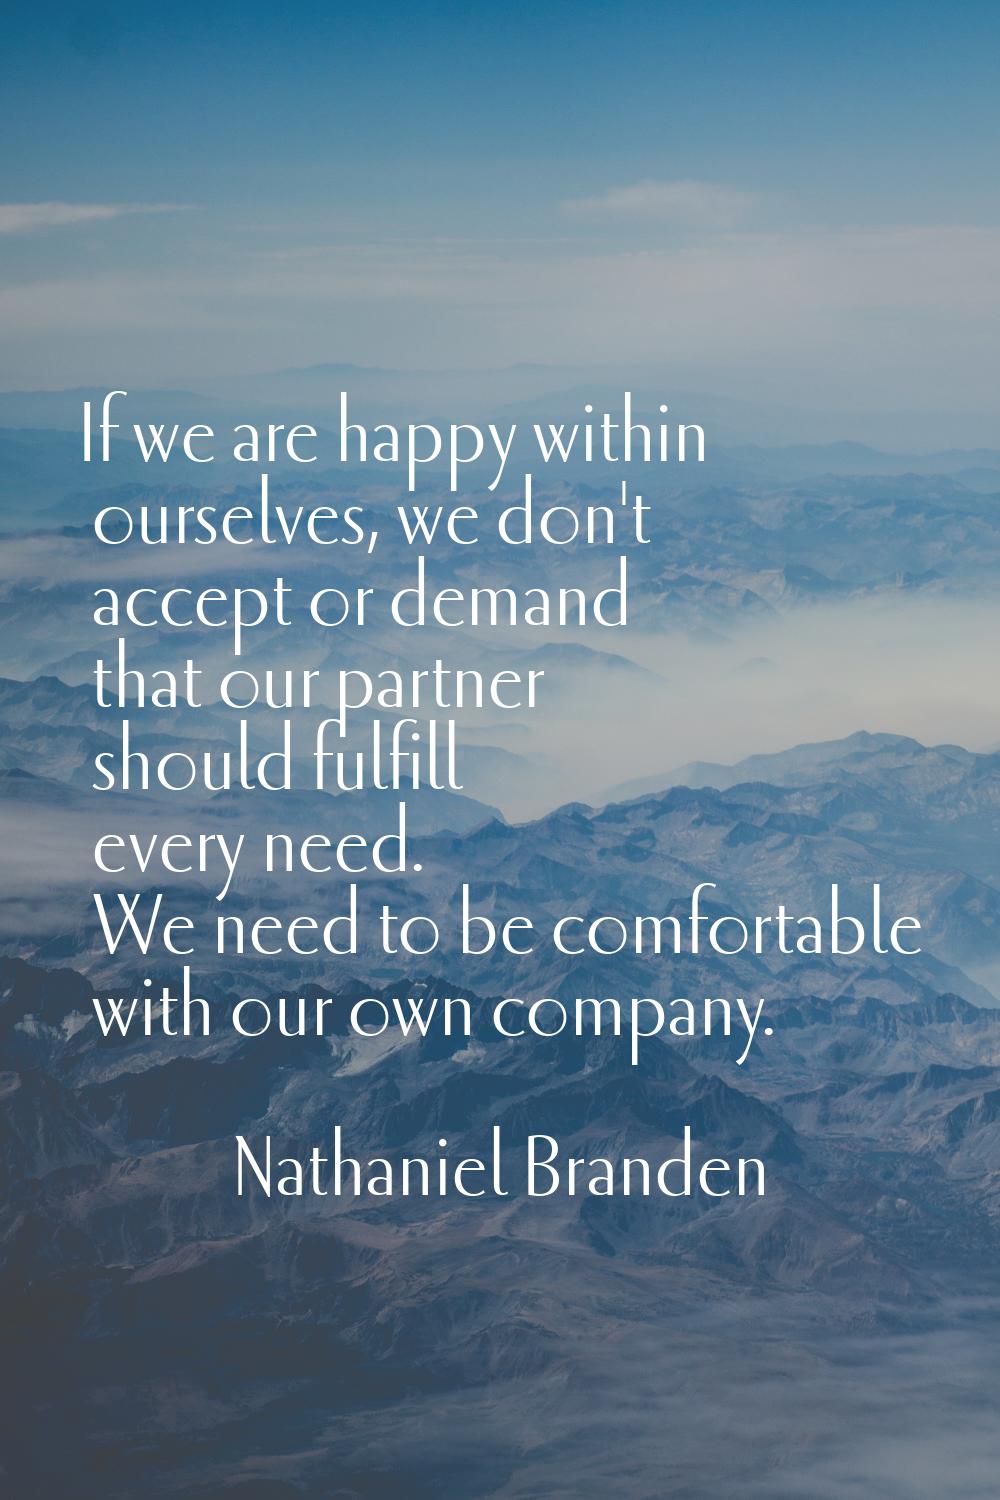 If we are happy within ourselves, we don't accept or demand that our partner should fulfill every n